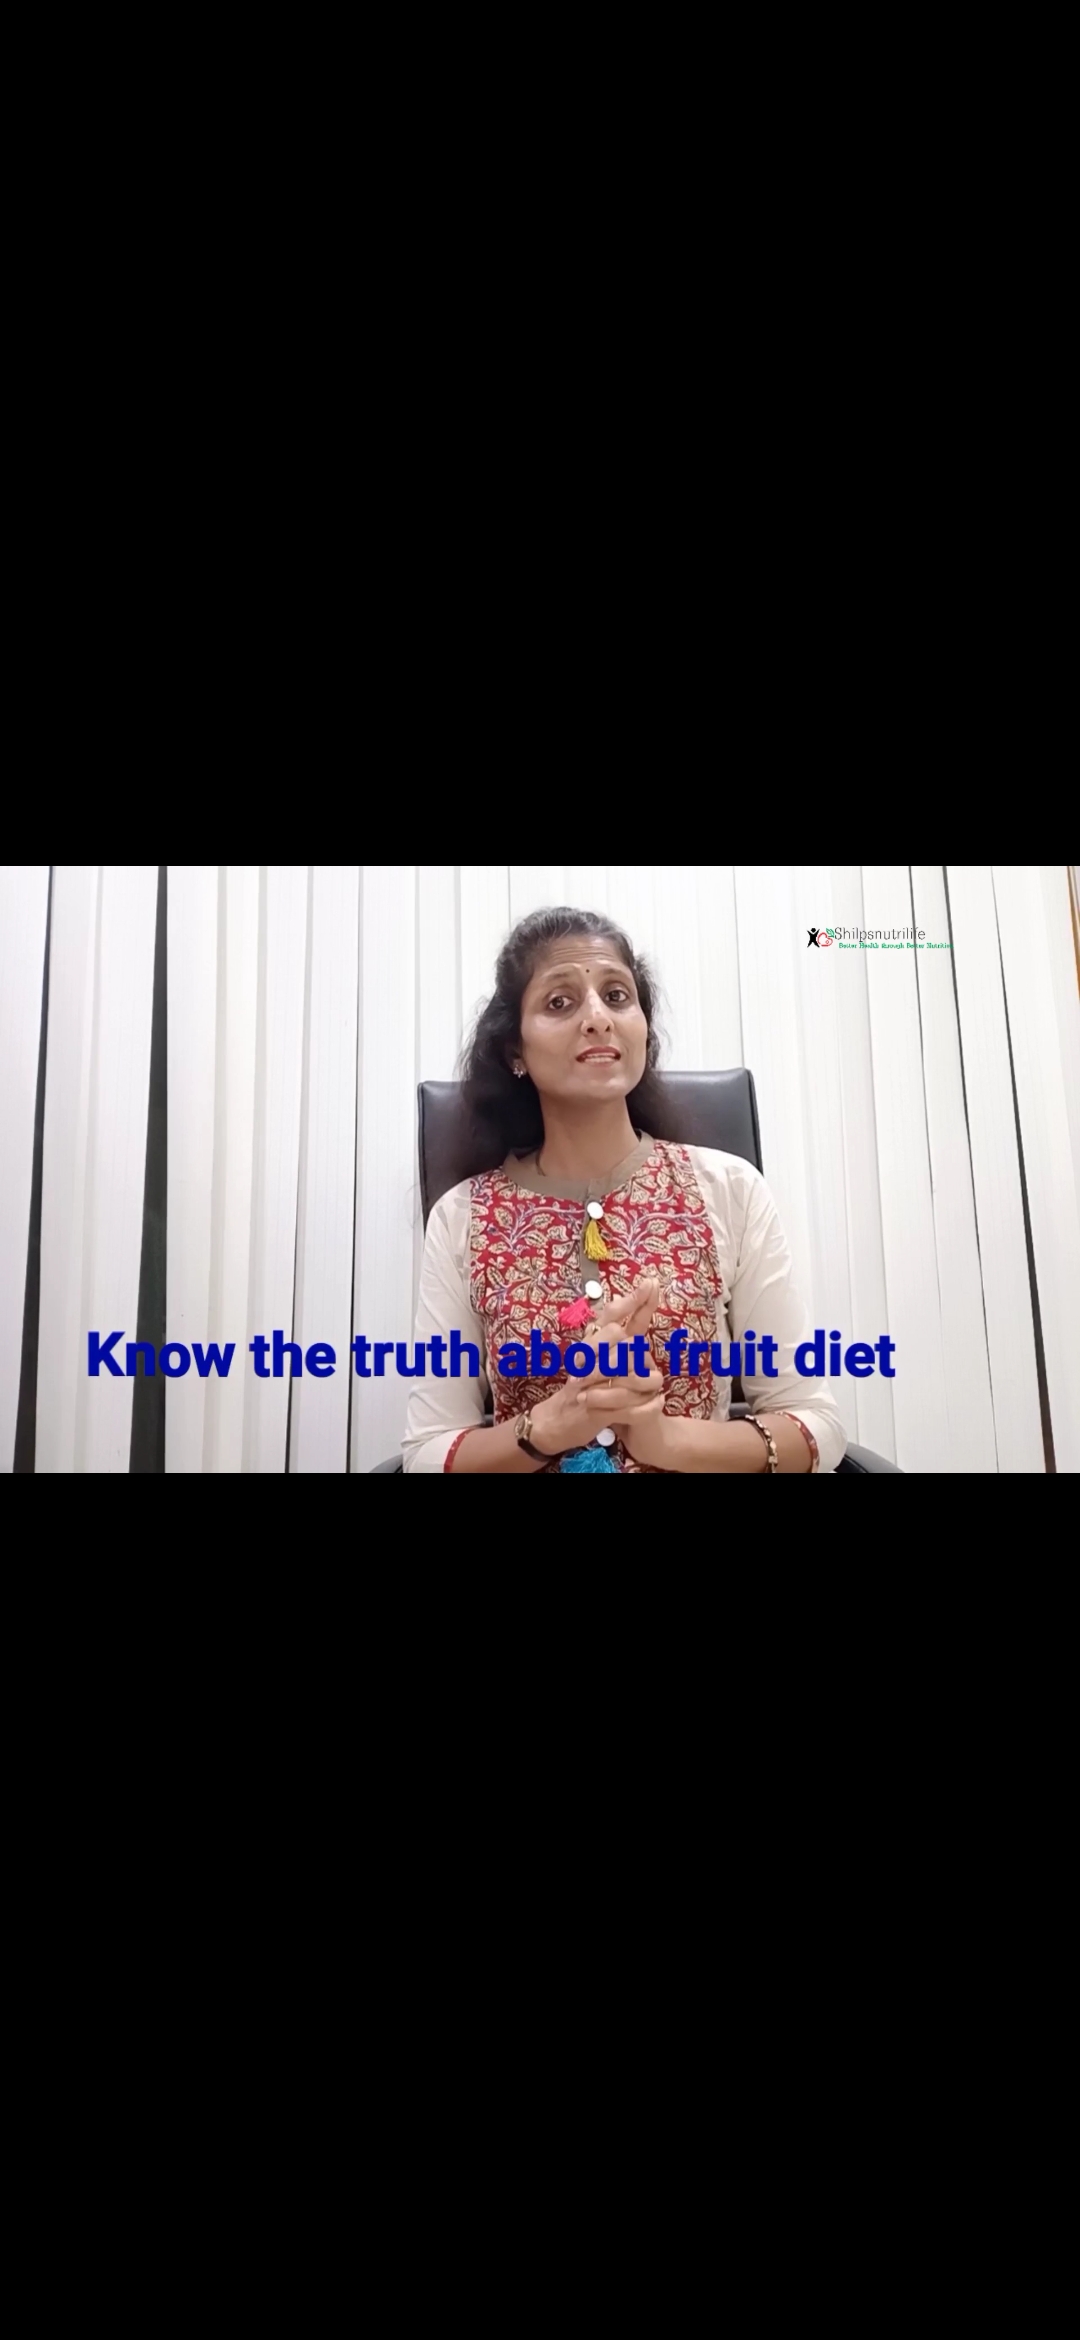 Fruit Diet – know the truth